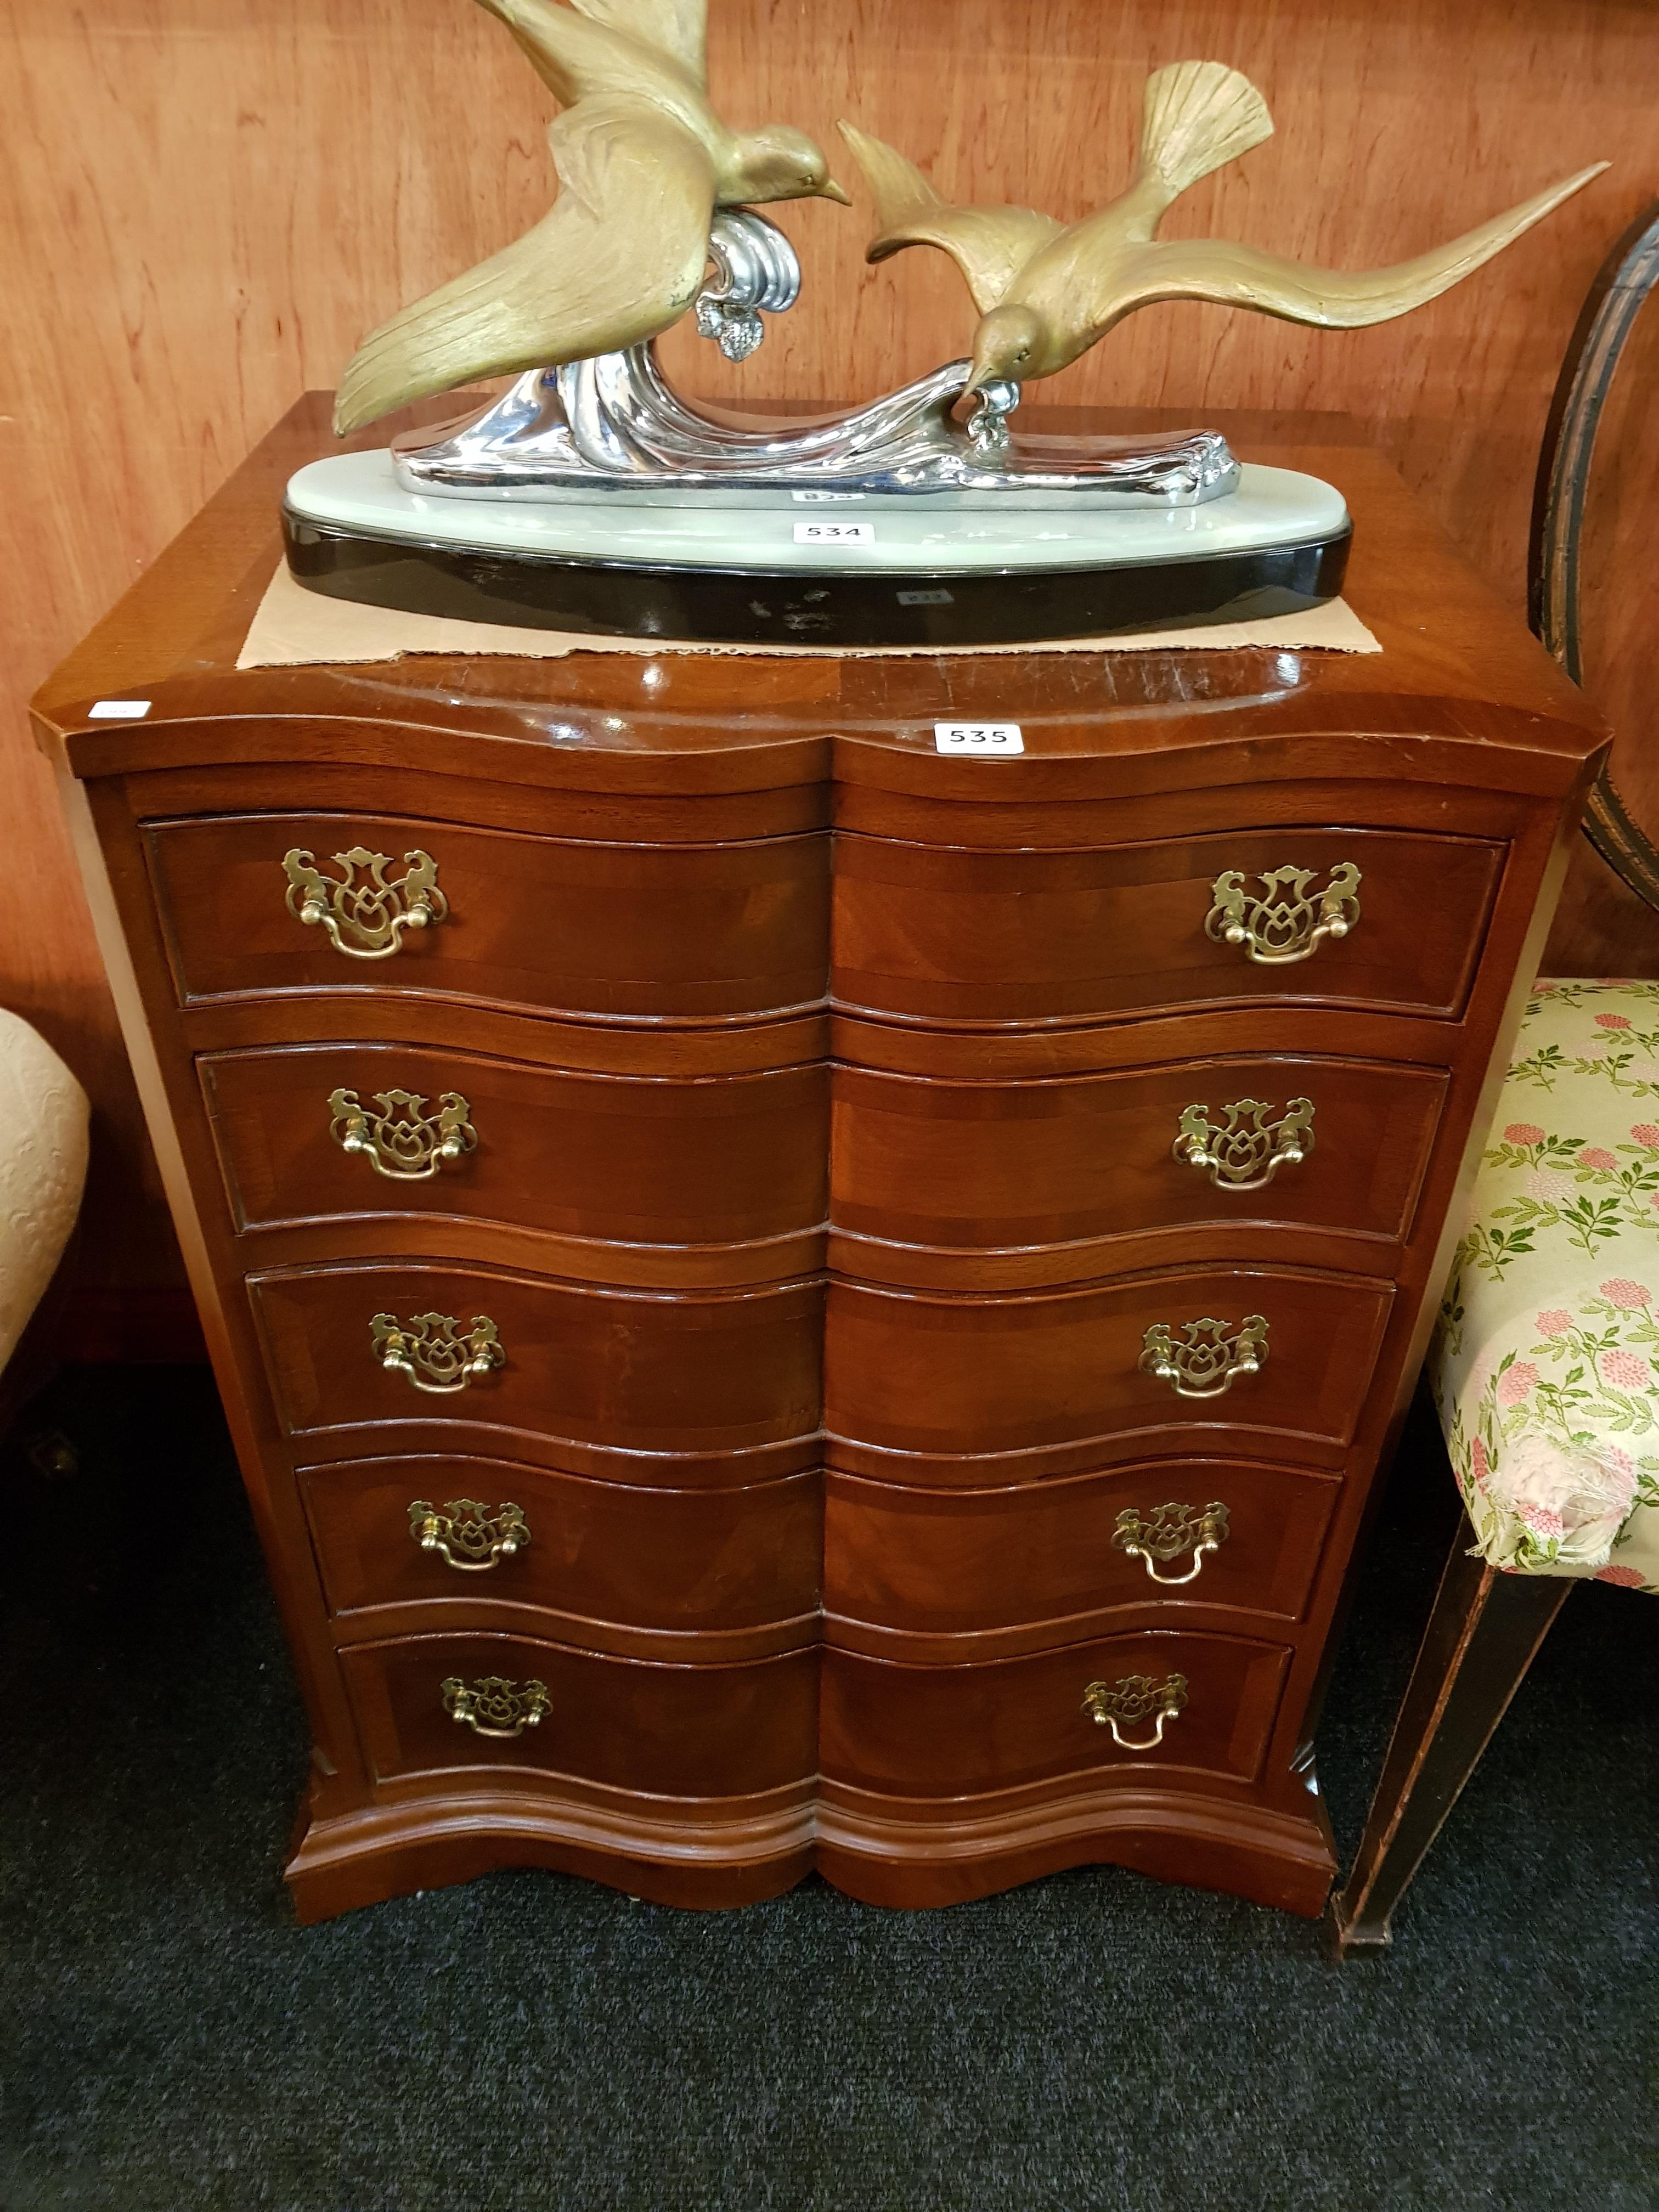 EDWARDIAN SERPENTINED MAHOGANY 5 DRAWER CHEST OF DRAWERS